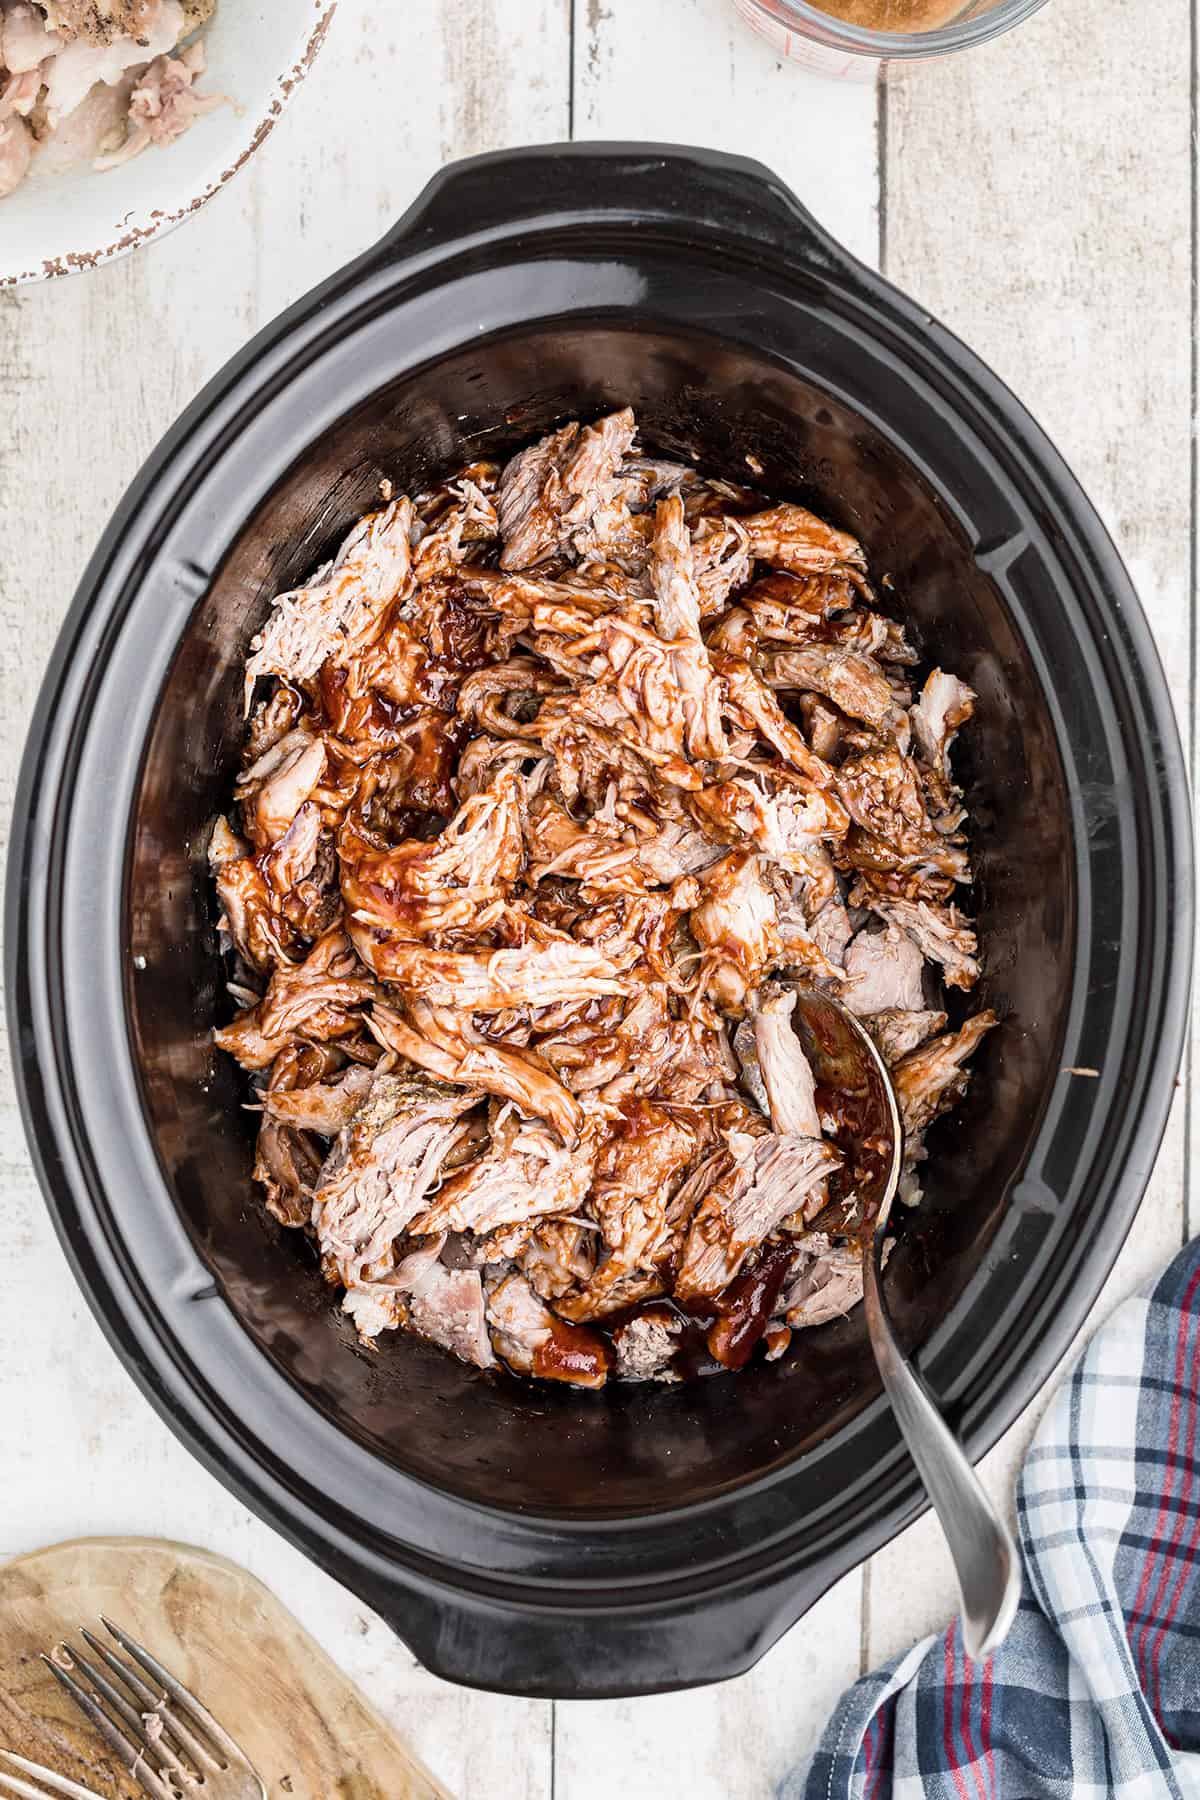 Sauce and juices stirred into the shredded pork.